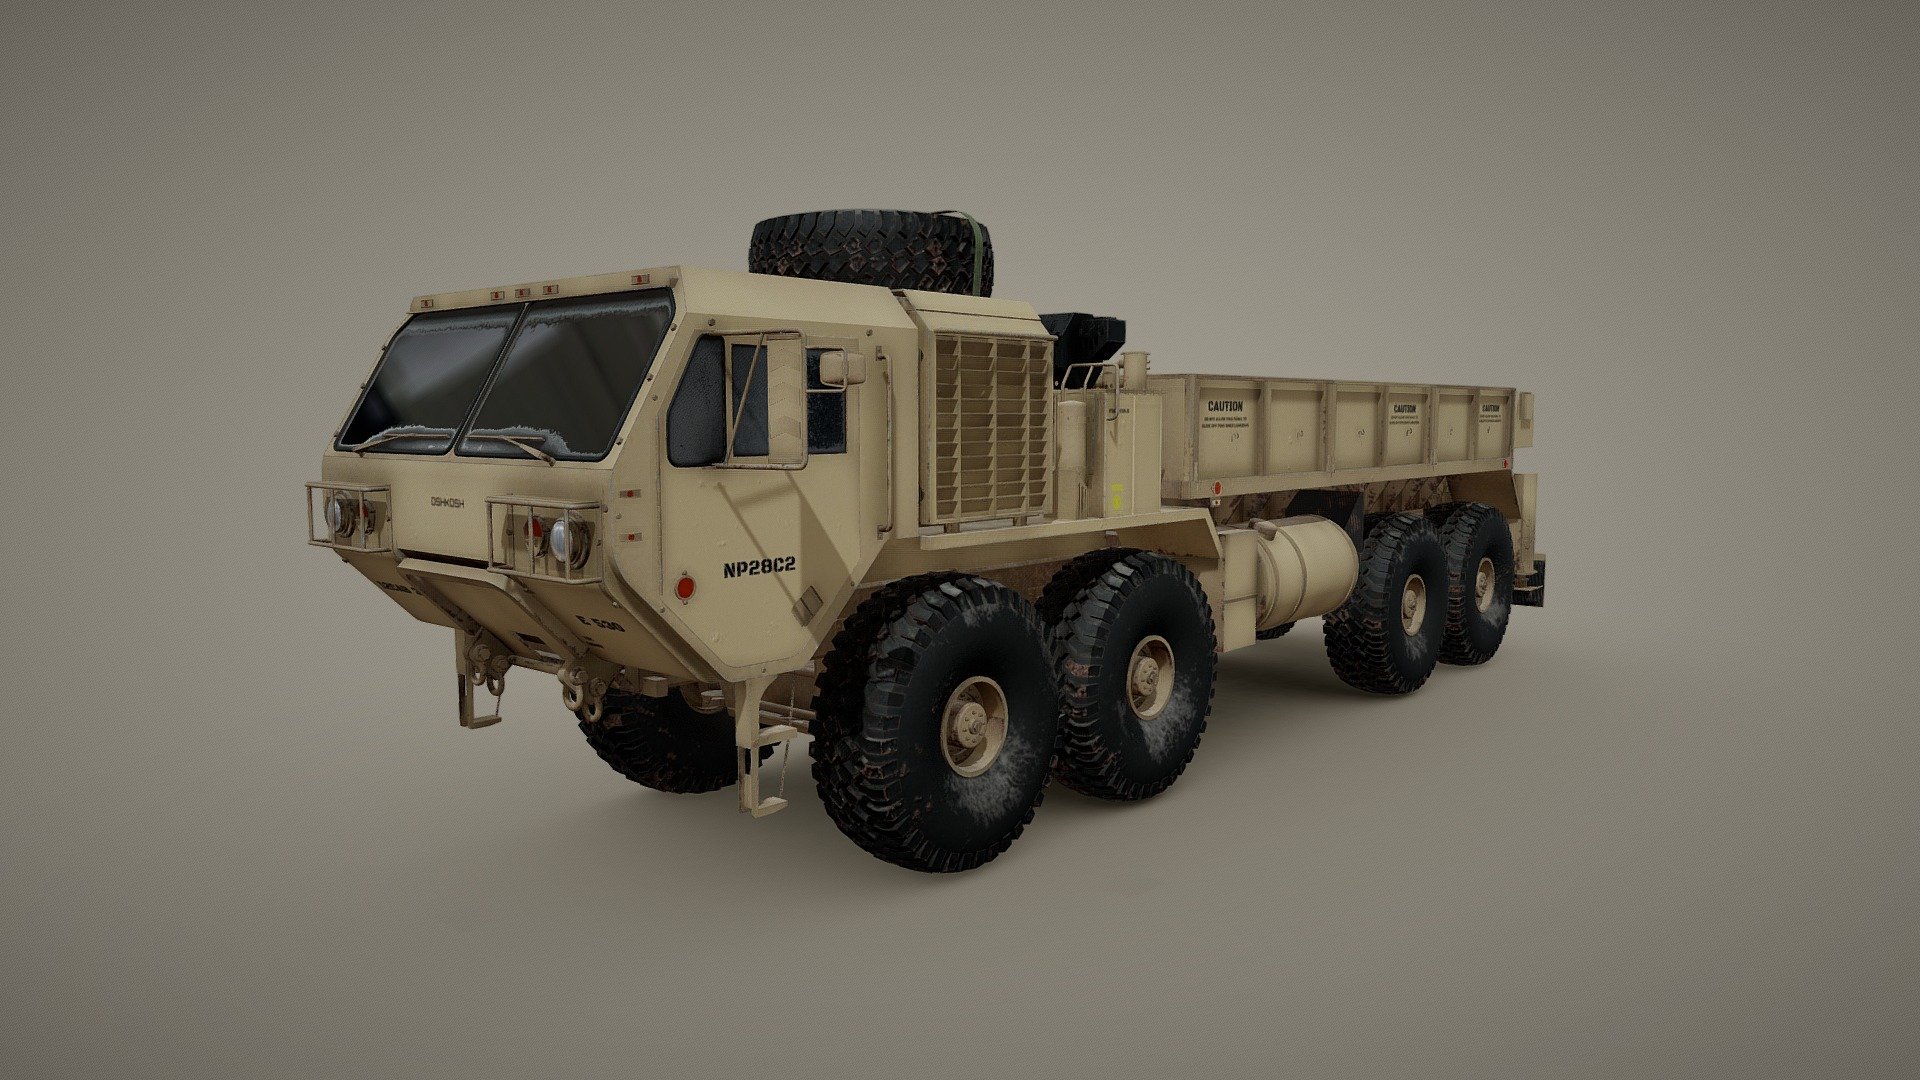 The Heavy Expanded Mobility Tactical Truck (HEMTT) is an eight-wheel drive, diesel-powered, 10-short-ton (9,100 kg) tactical truck. The M977 HEMTT first entered service in 1982 with the United States Army as a replacement for the M520 Goer, and since that date has remained in production for the U.S. Army and other nations. By Q2 2021, around 35,800 HEMTTs in various configurations had been produced by Oshkosh Defense through new-build contracts and around 14,000 of these had been re-manufactured. Current variants have the A4 suffix 3d model